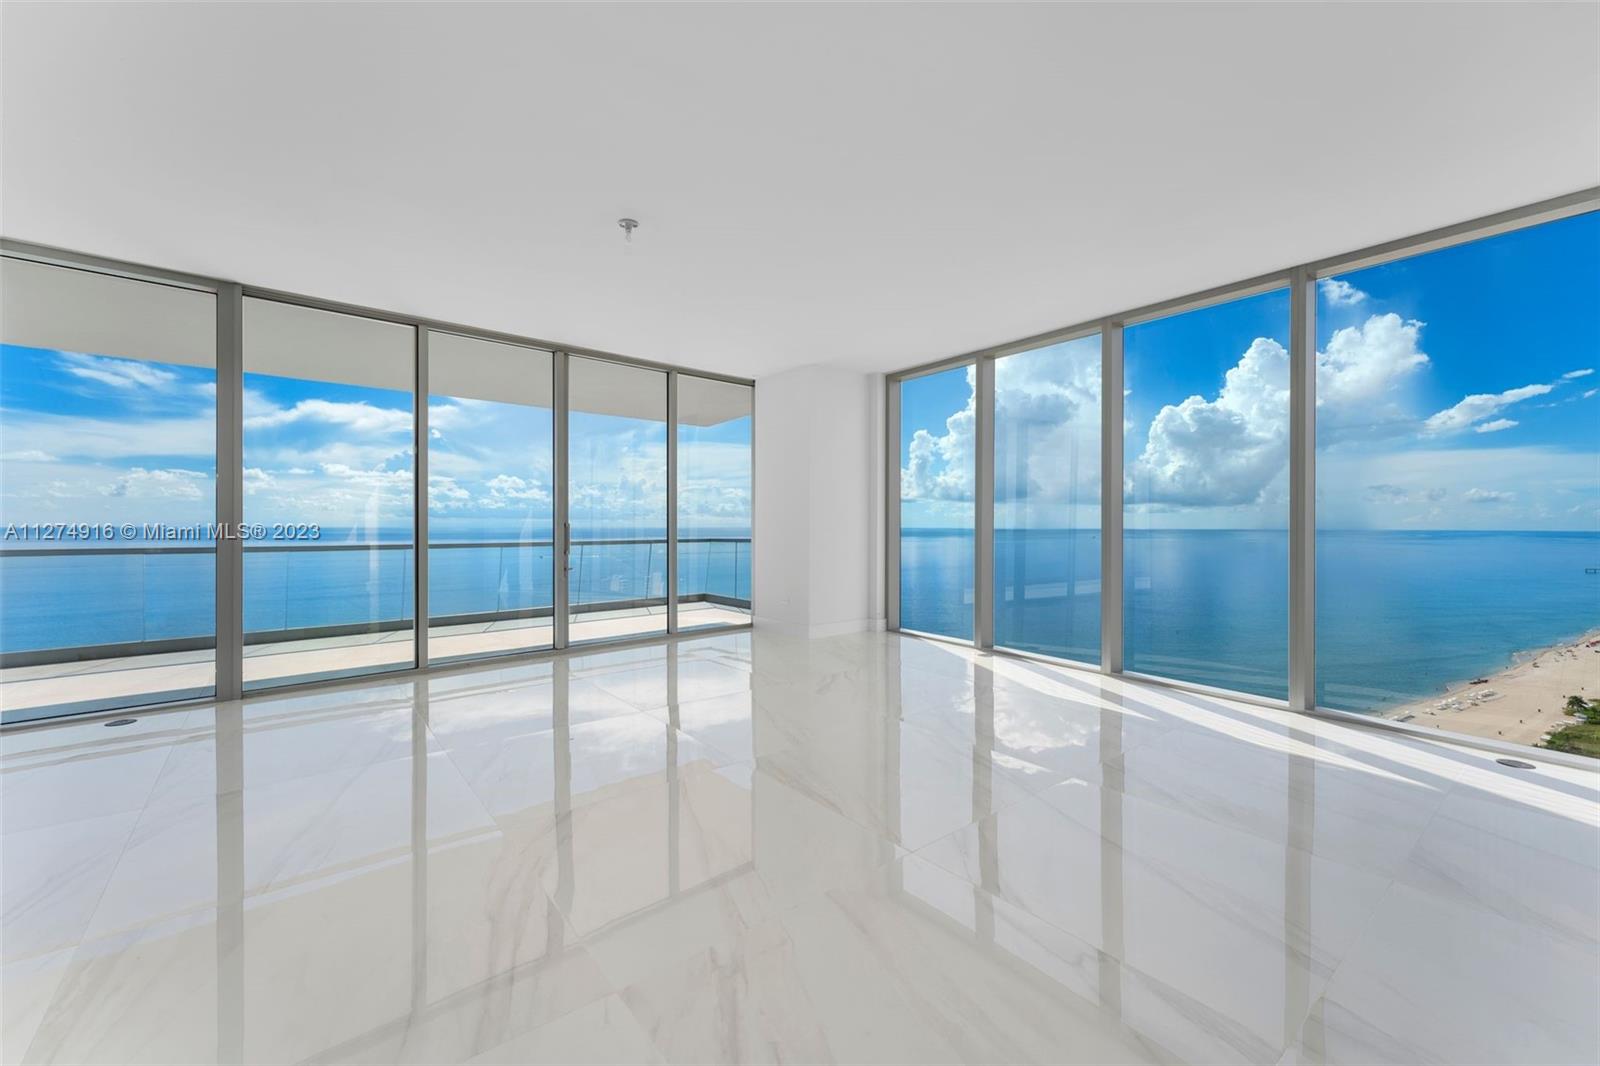 Welcome to Turnberry Ocean Club, a stunning oceanfront condominium tower located on a stretch of pristine beachfront in beautiful Sunny Isles Beach. This immaculate, premium southern exposure, flow-through residence with direct ocean and Intracoastal views, is ready for your personal touch! The unit is sold furniture ready! Finished with state-of-the-art Italian porcelain floors, appointed with Imported Snaidero® Italian custom cabinetry in kitchens, bathrooms and laundry rooms along with imported Italian stone countertops, Top-of-the-line Gaggenau® appliances and much more! Building features over 70,000 Sqft expansive resort style amenities, beach club, 3 story Private Sky Club with sunrise & sunset pool, State-of-the-art wellness & SPA, private dining & entertainment and much more!